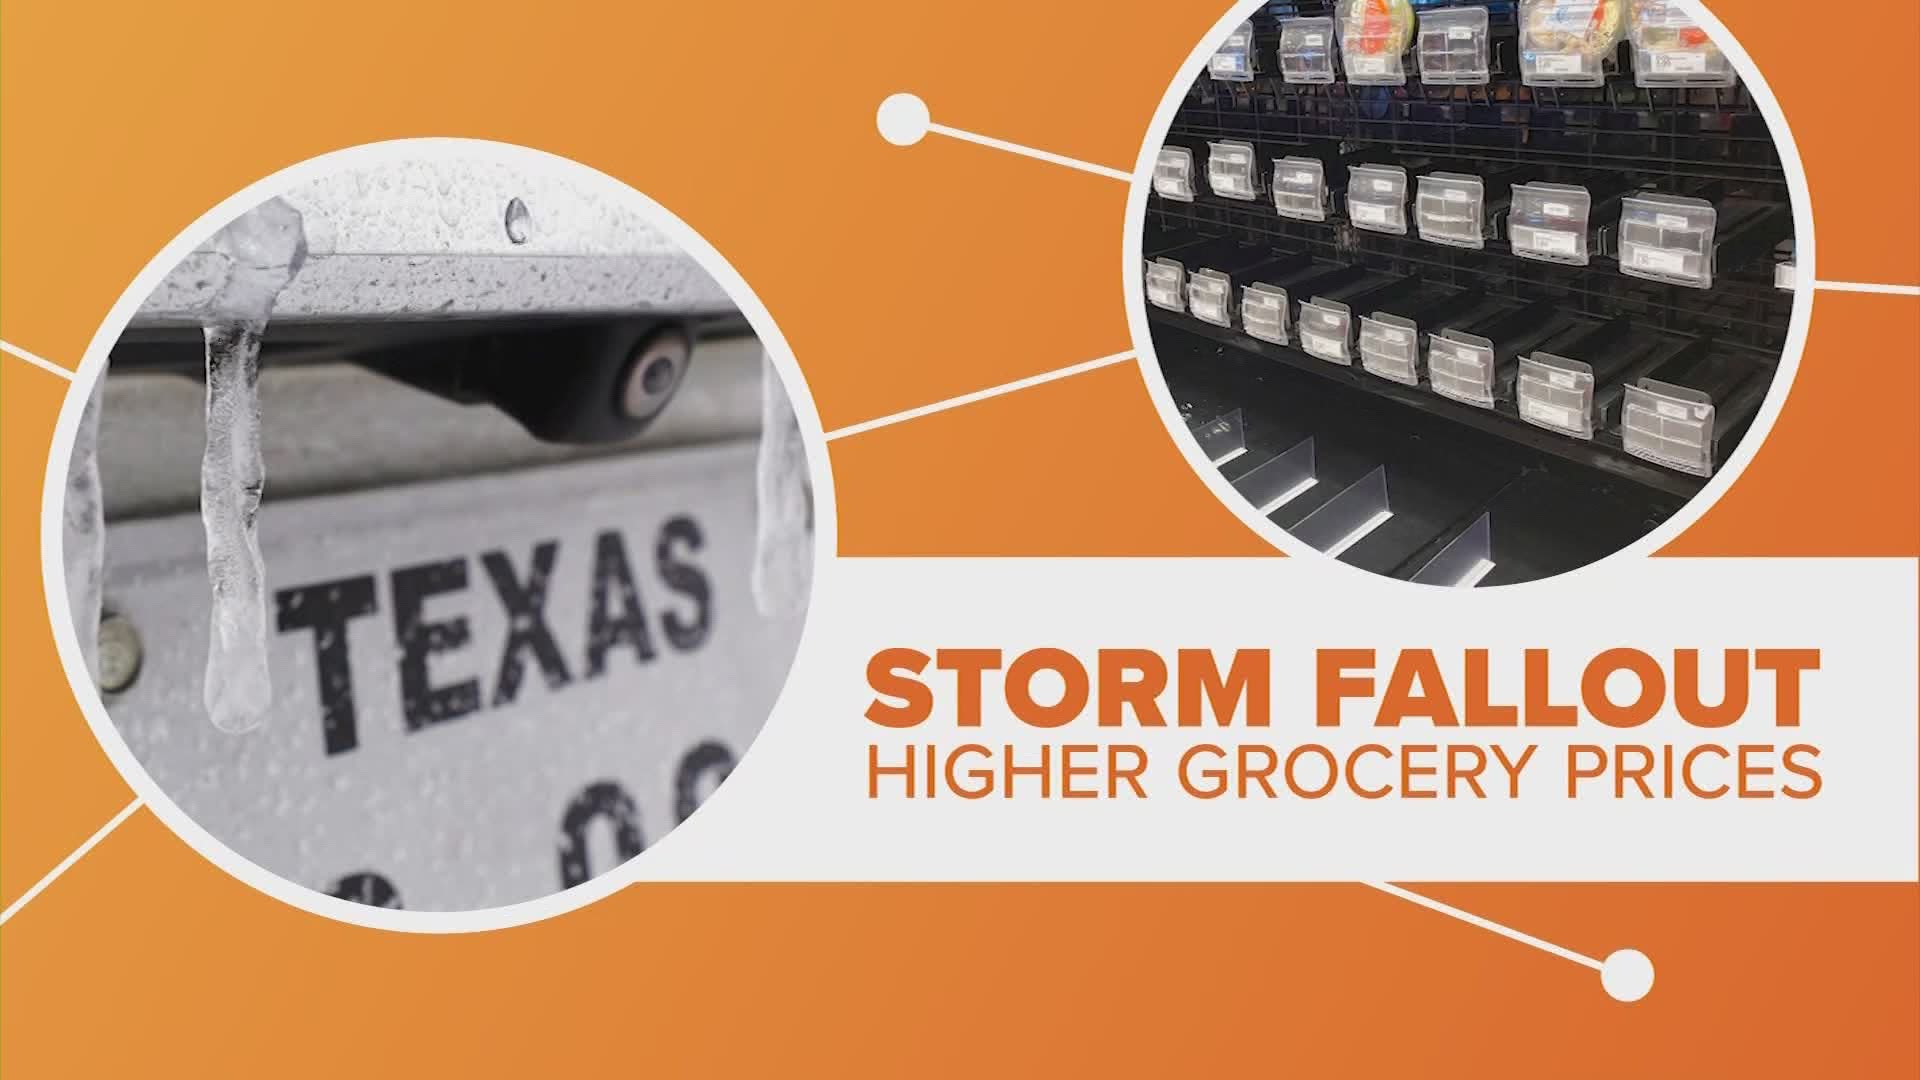 More fallout from that winter storm that hit Texas, it could raise grocery prices. Let’s connect the dots.